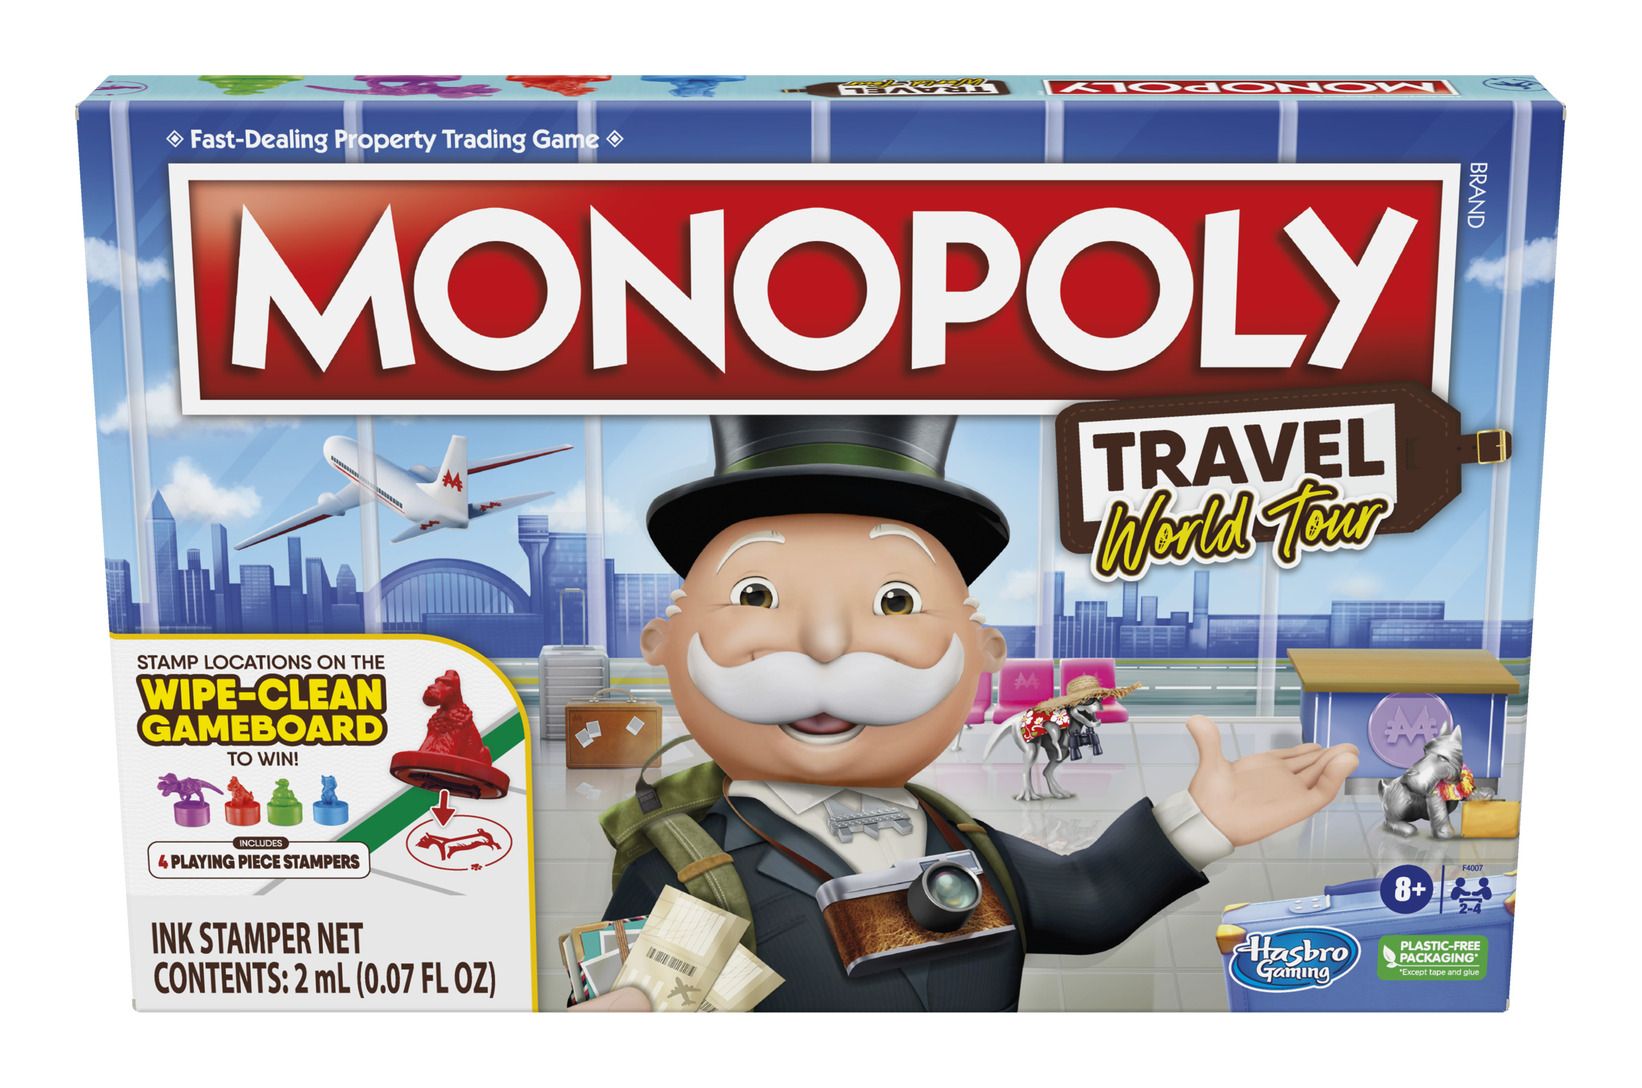 The Monopoly Travel World Tour board game is a twist on classic Monopoly board gameplay! Sold by Board Hoarders